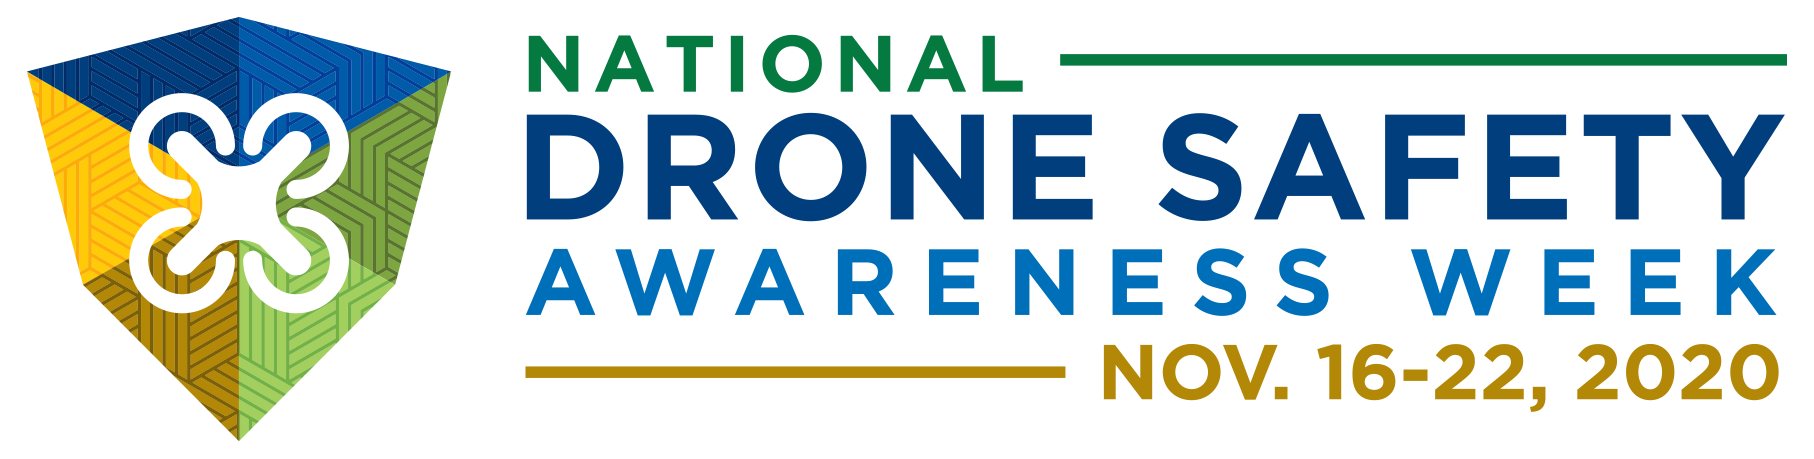 National Drone Safety Awareness Week 2020